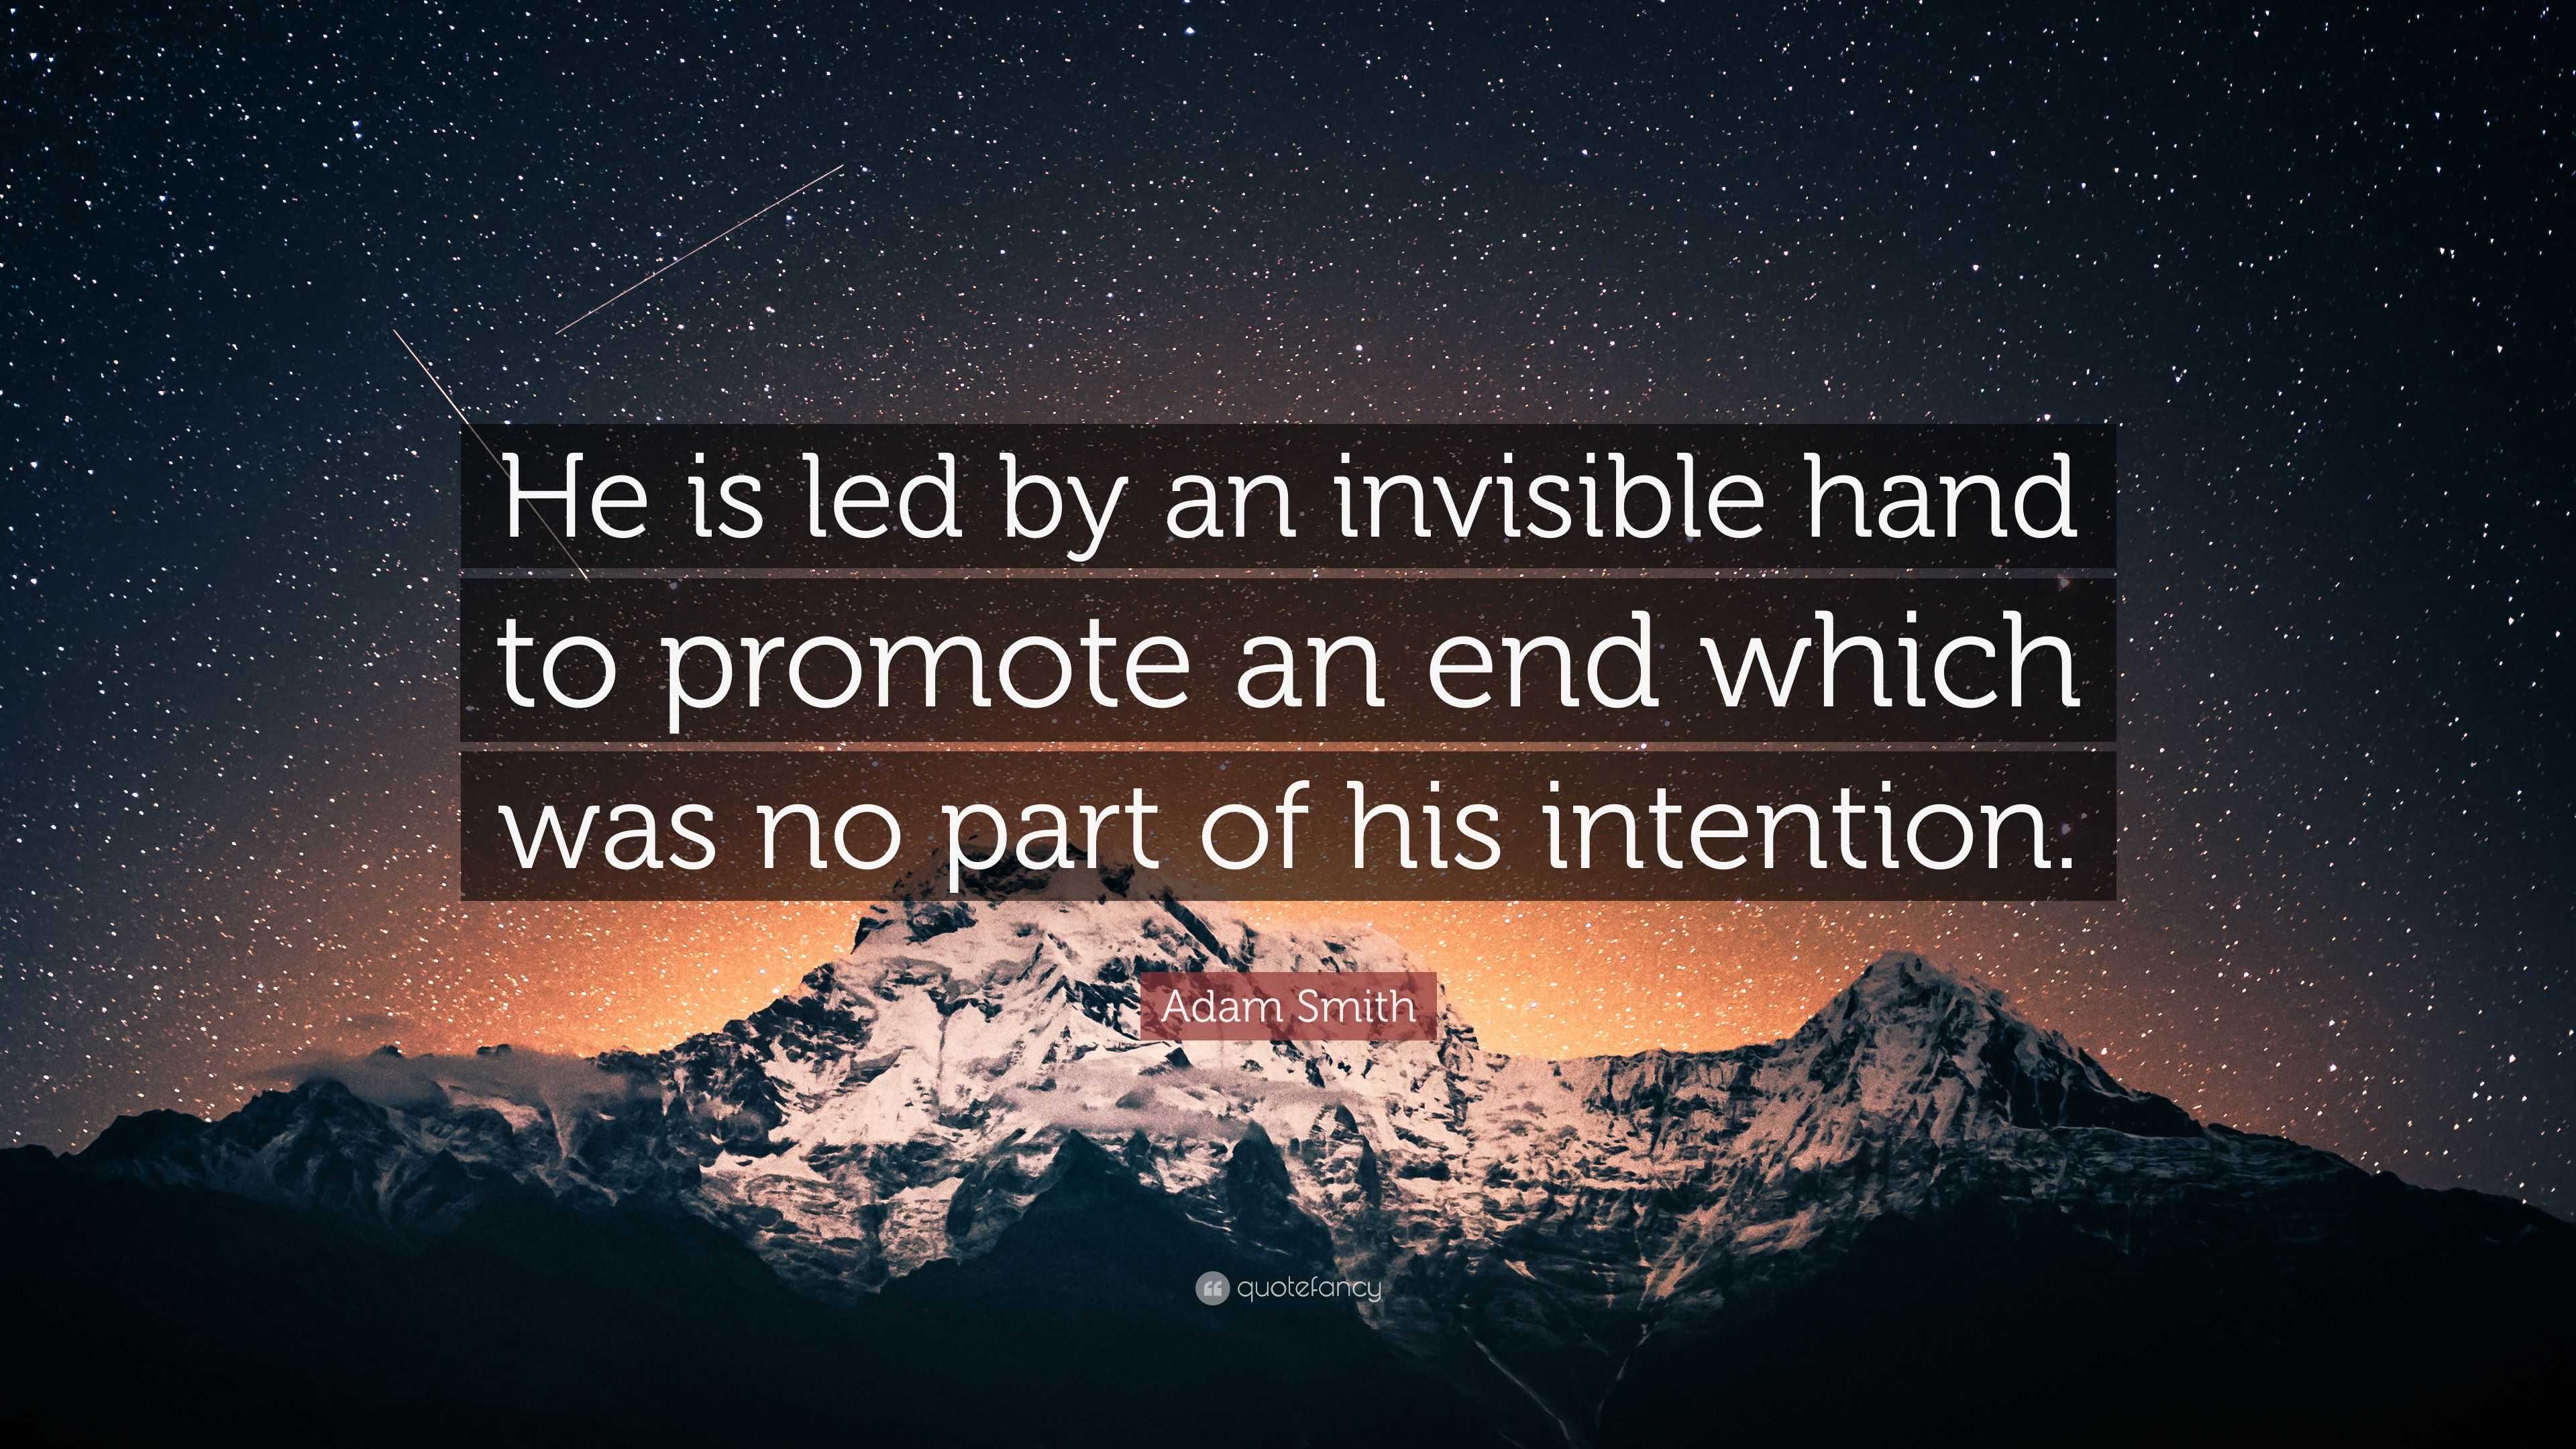 adam smith invisible hand meaning